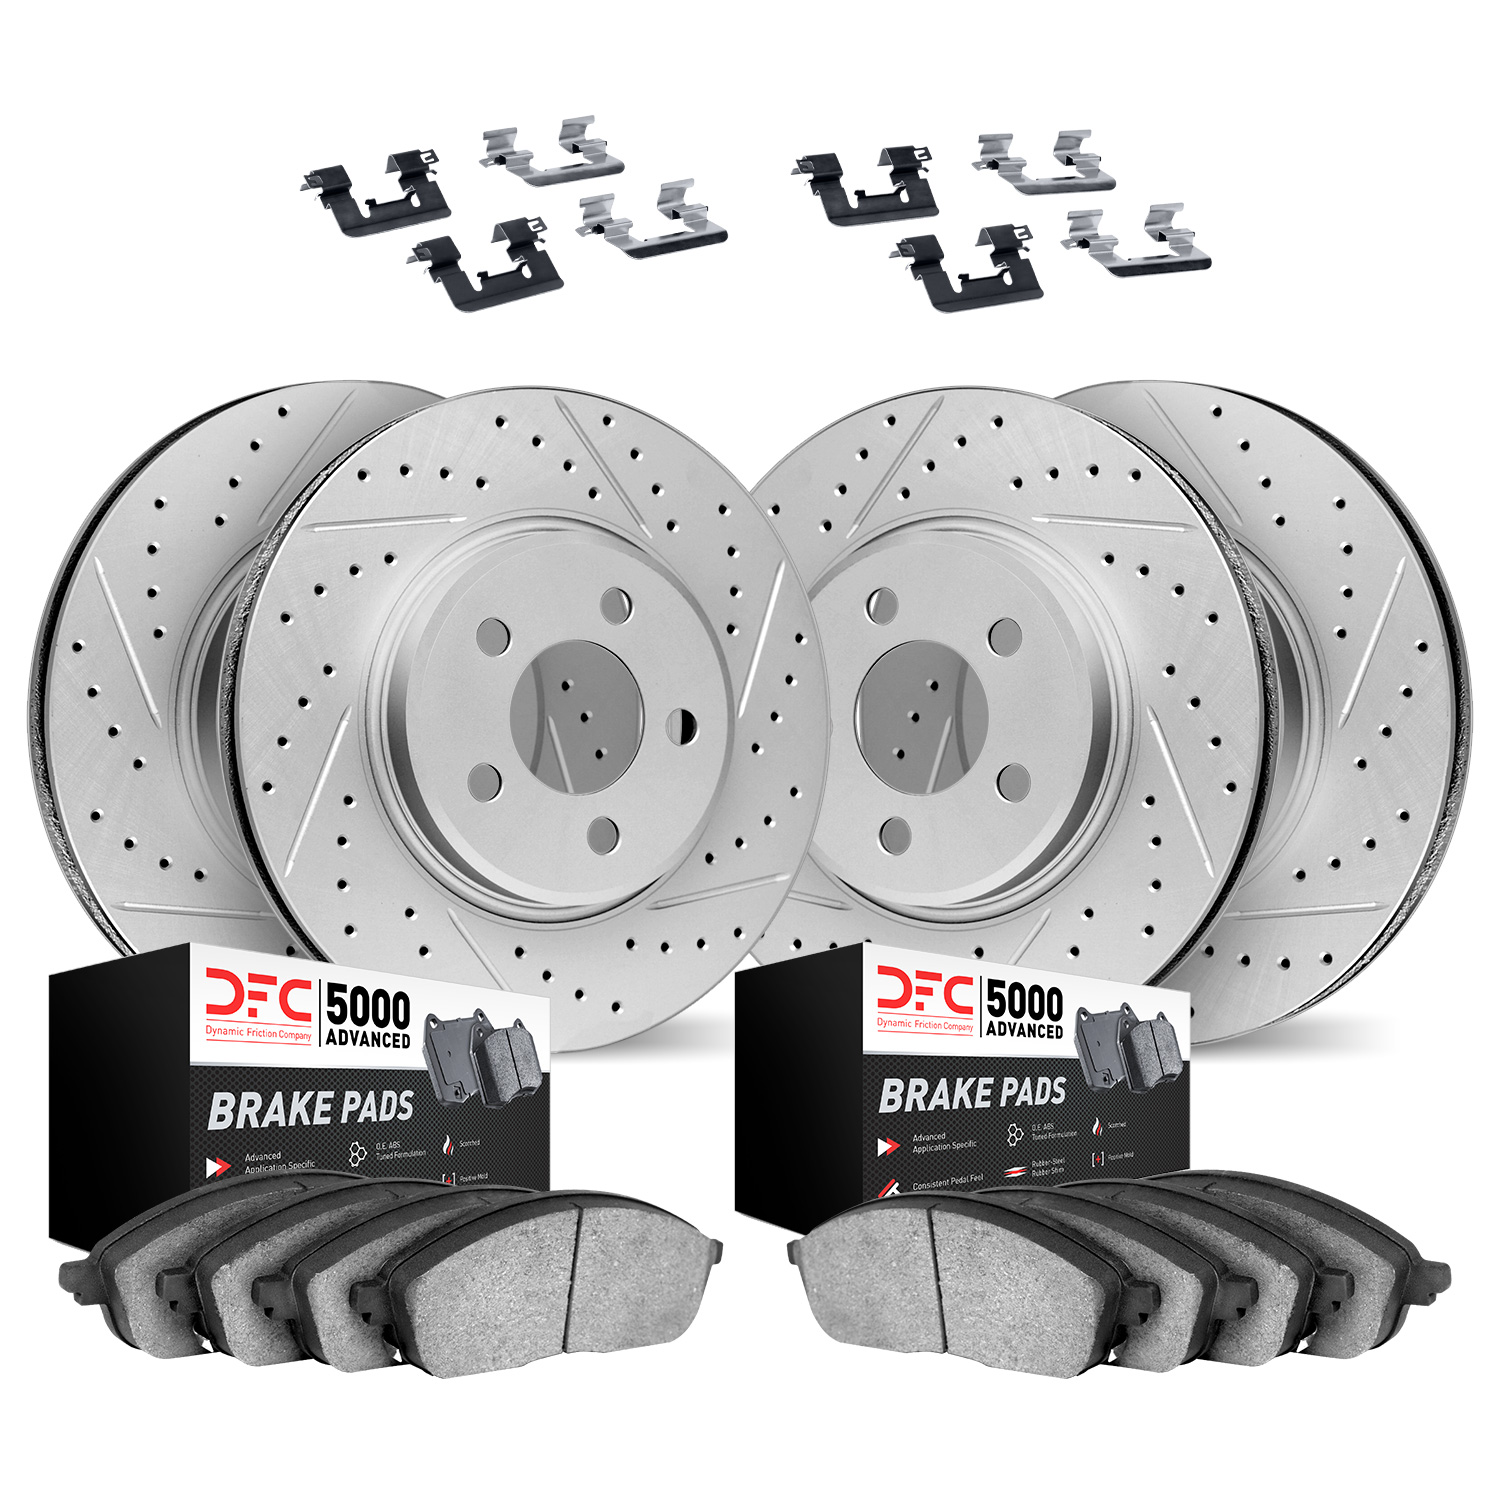 2514-31003 Geoperformance Drilled/Slotted Rotors w/5000 Advanced Brake Pads Kit & Hardware, 2006-2006 BMW, Position: Front and R